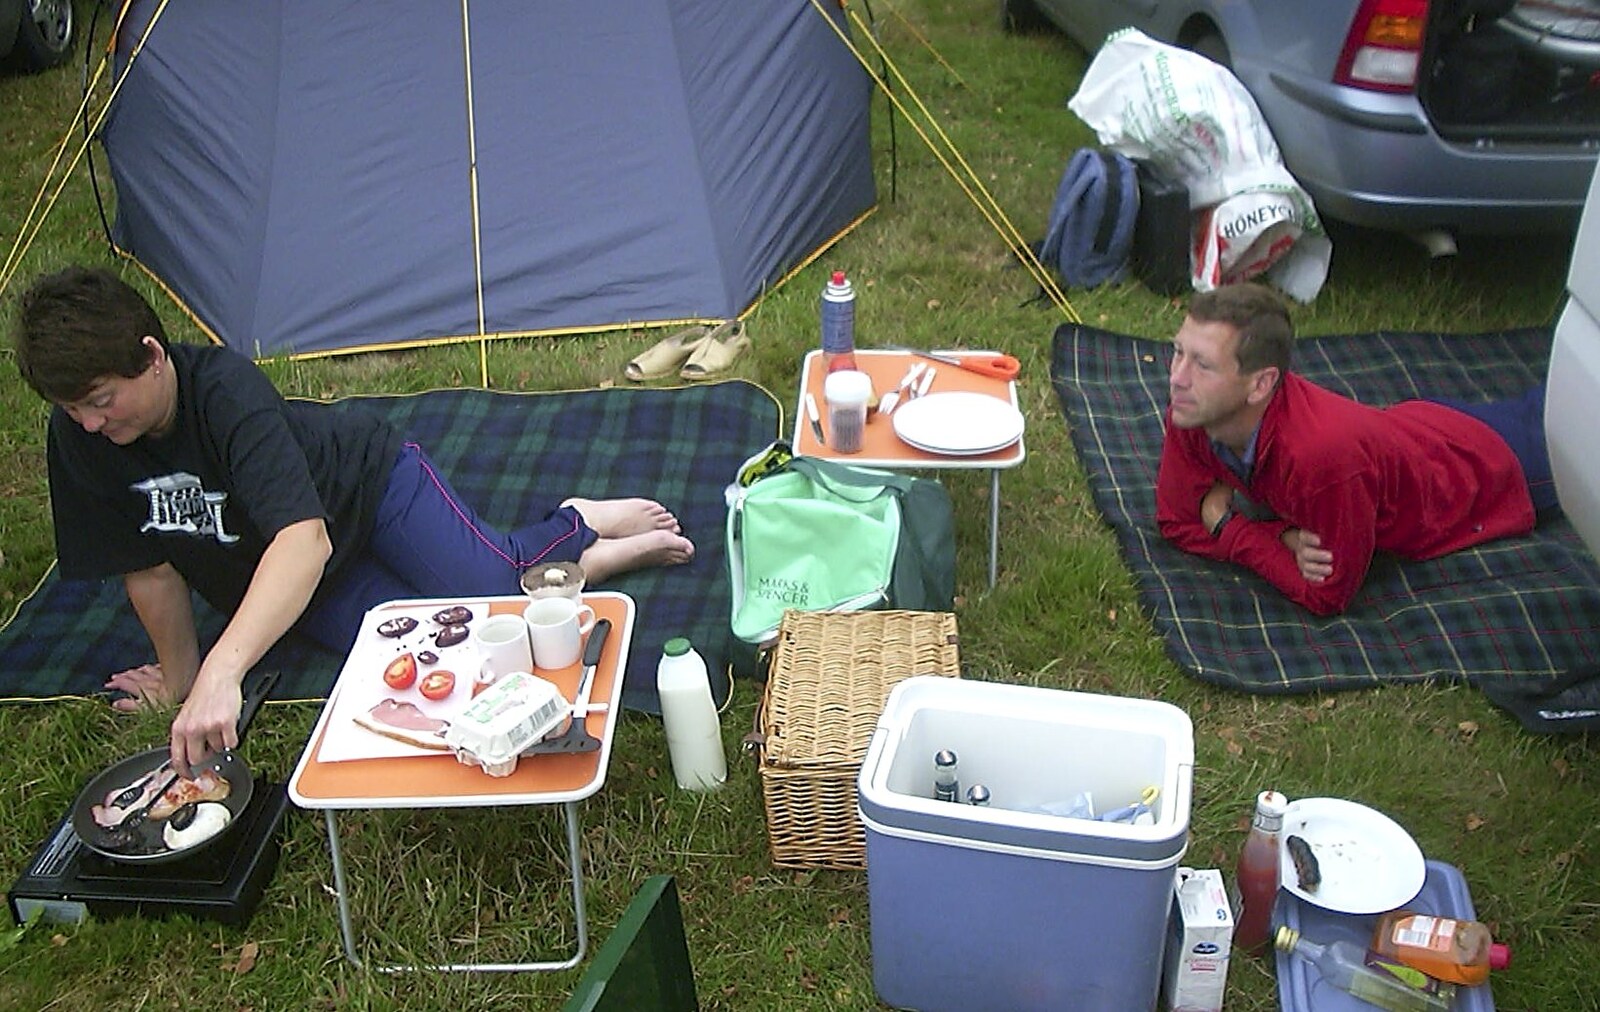 A BSCC Splinter Group Camping Trip, Shottisham, Suffolk - 13th August 2004: Apple peers over to check on the sausages